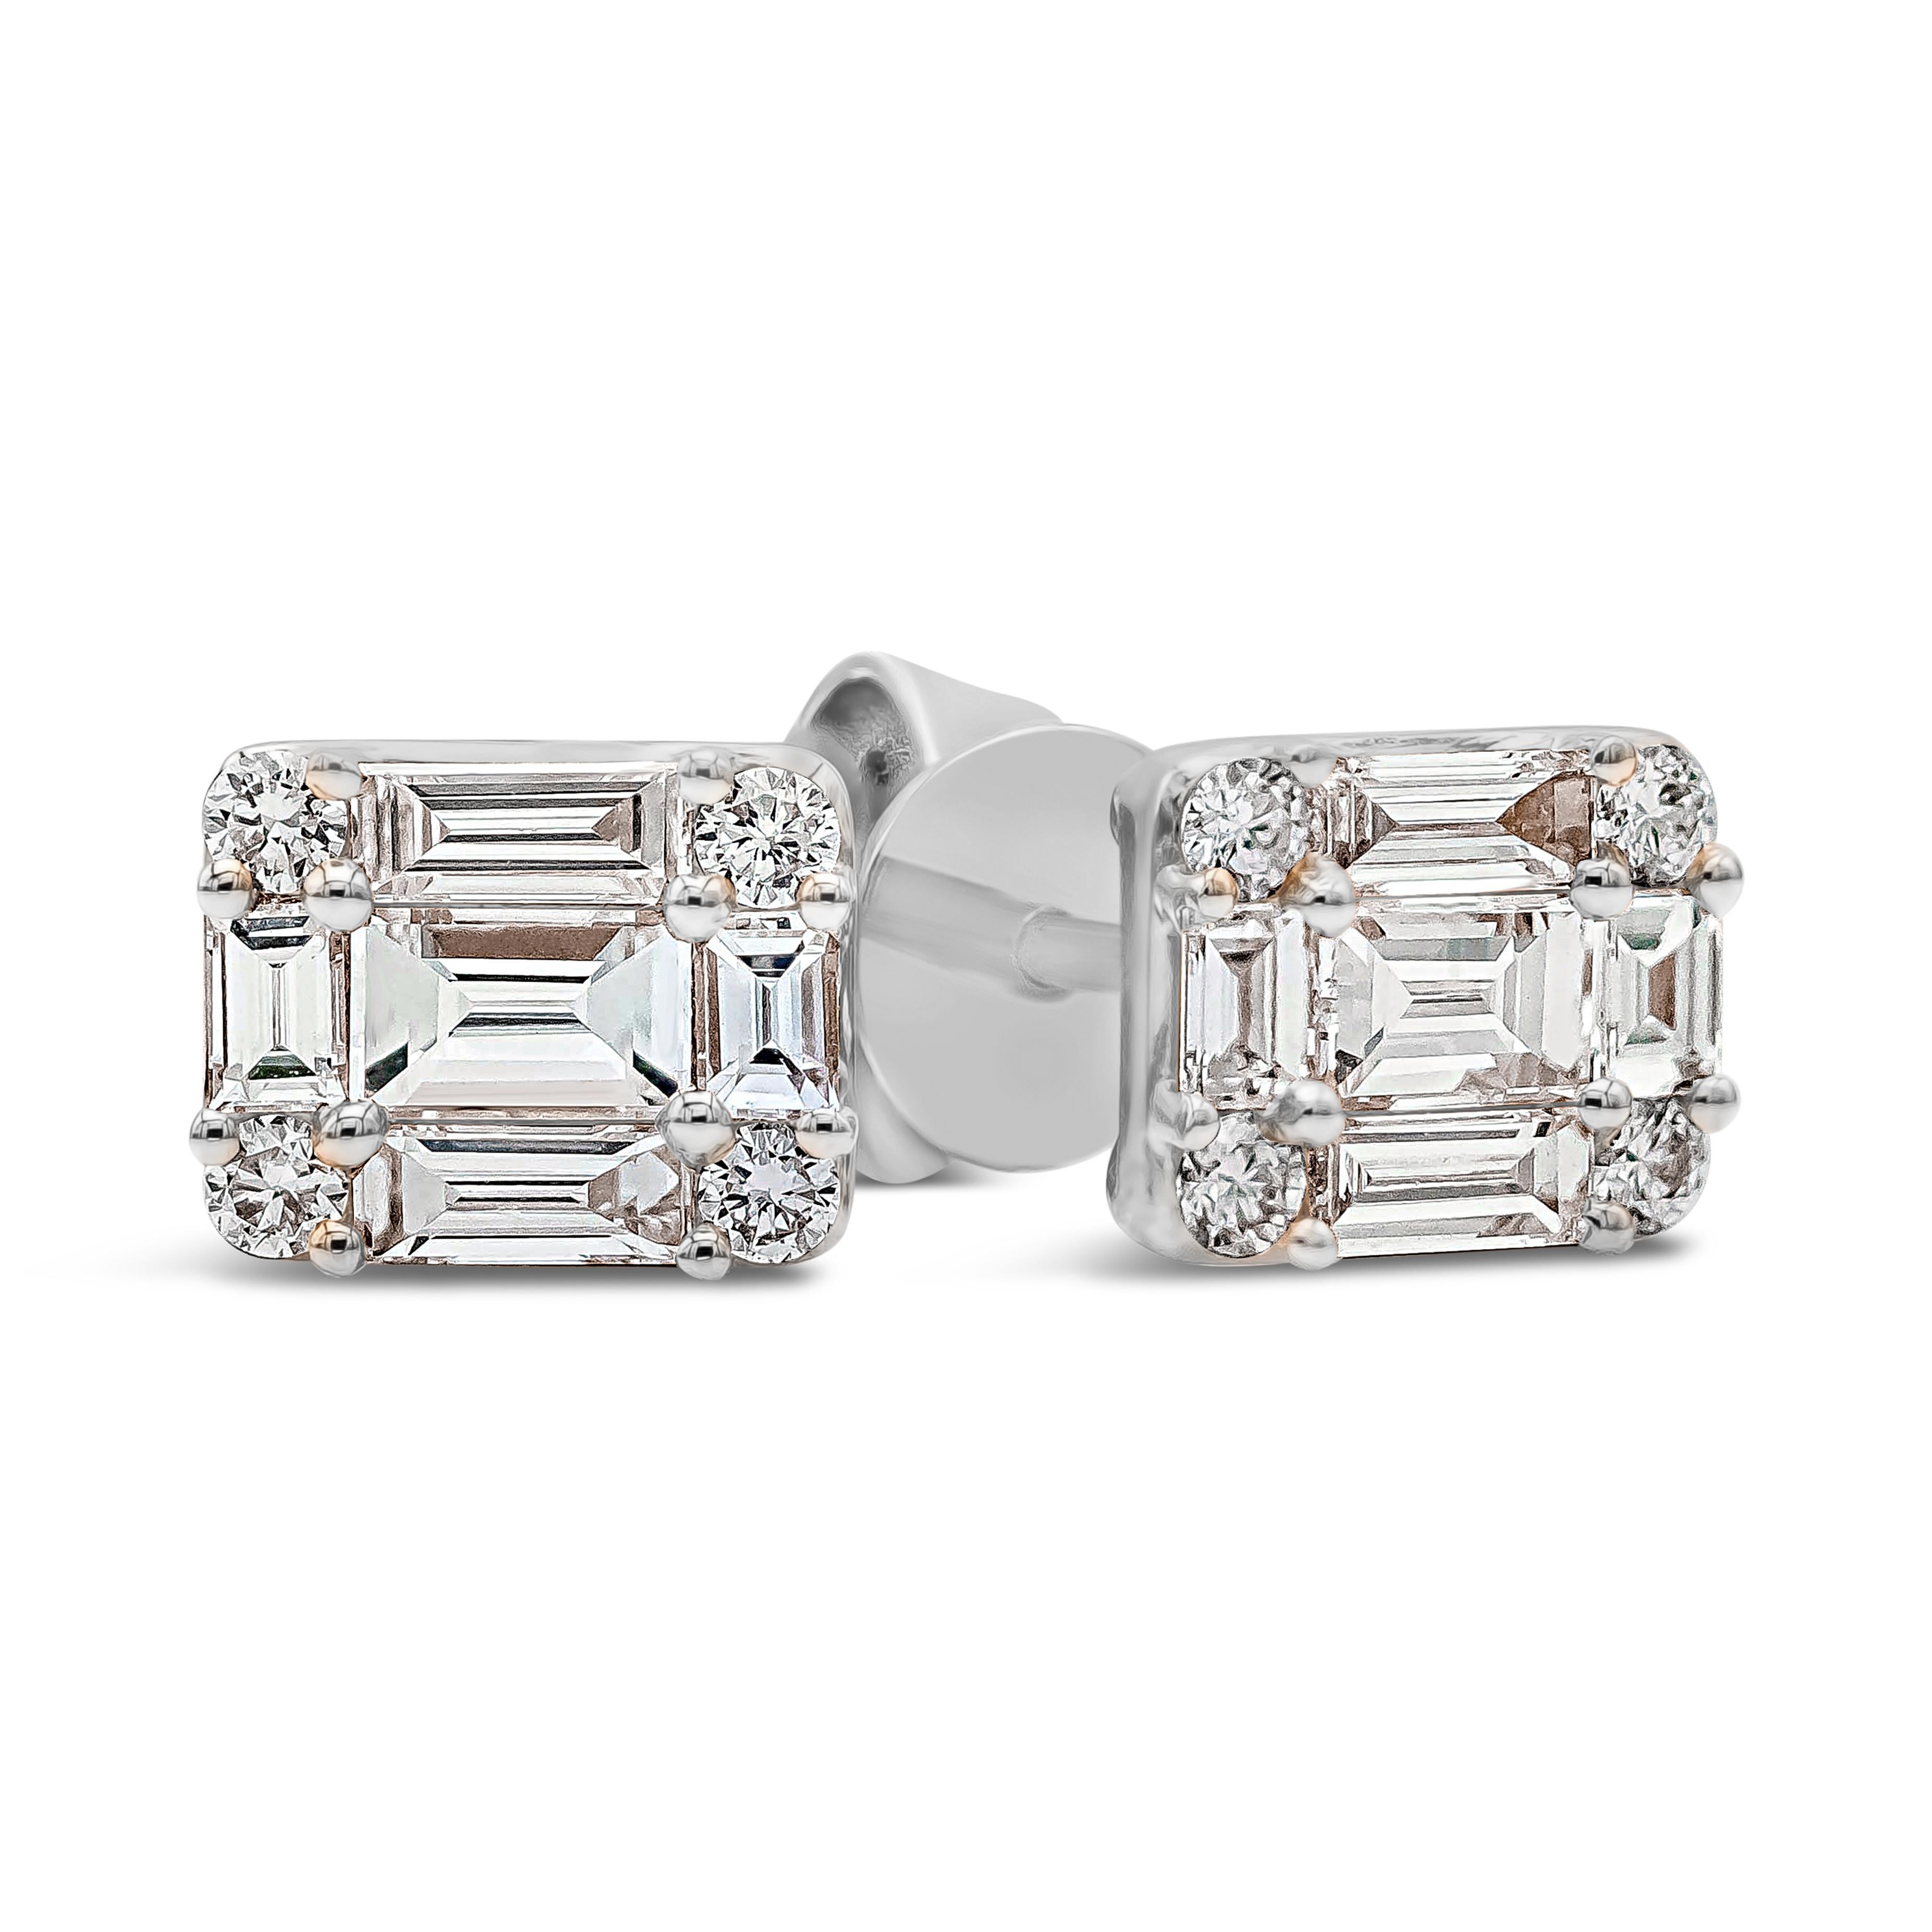 A stylish pair of stud earrings showcasing a cluster of baguette and round diamonds set in an illusion style to make it look like one large diamond. Baguette diamonds weigh 0.47 carats total; round diamonds weigh 0.10 carats total. Made in 18k white